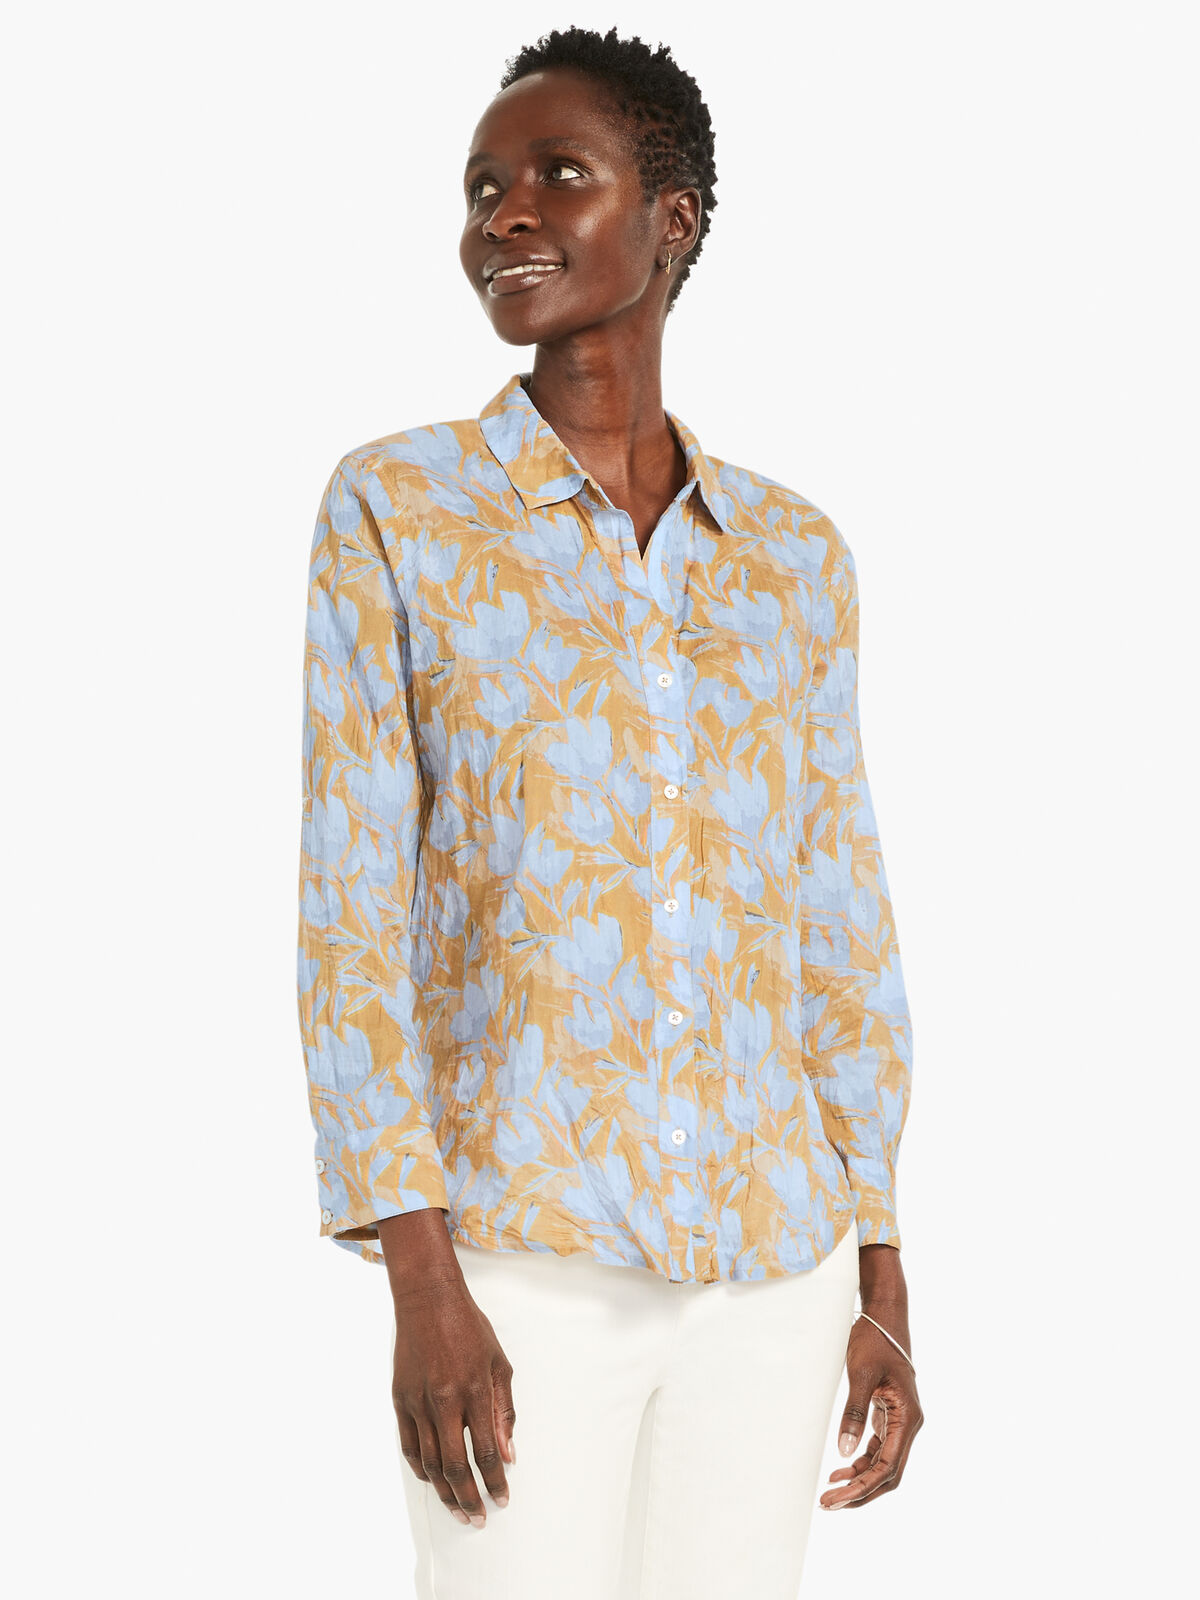 Midday Meadows Crinkle Shirt